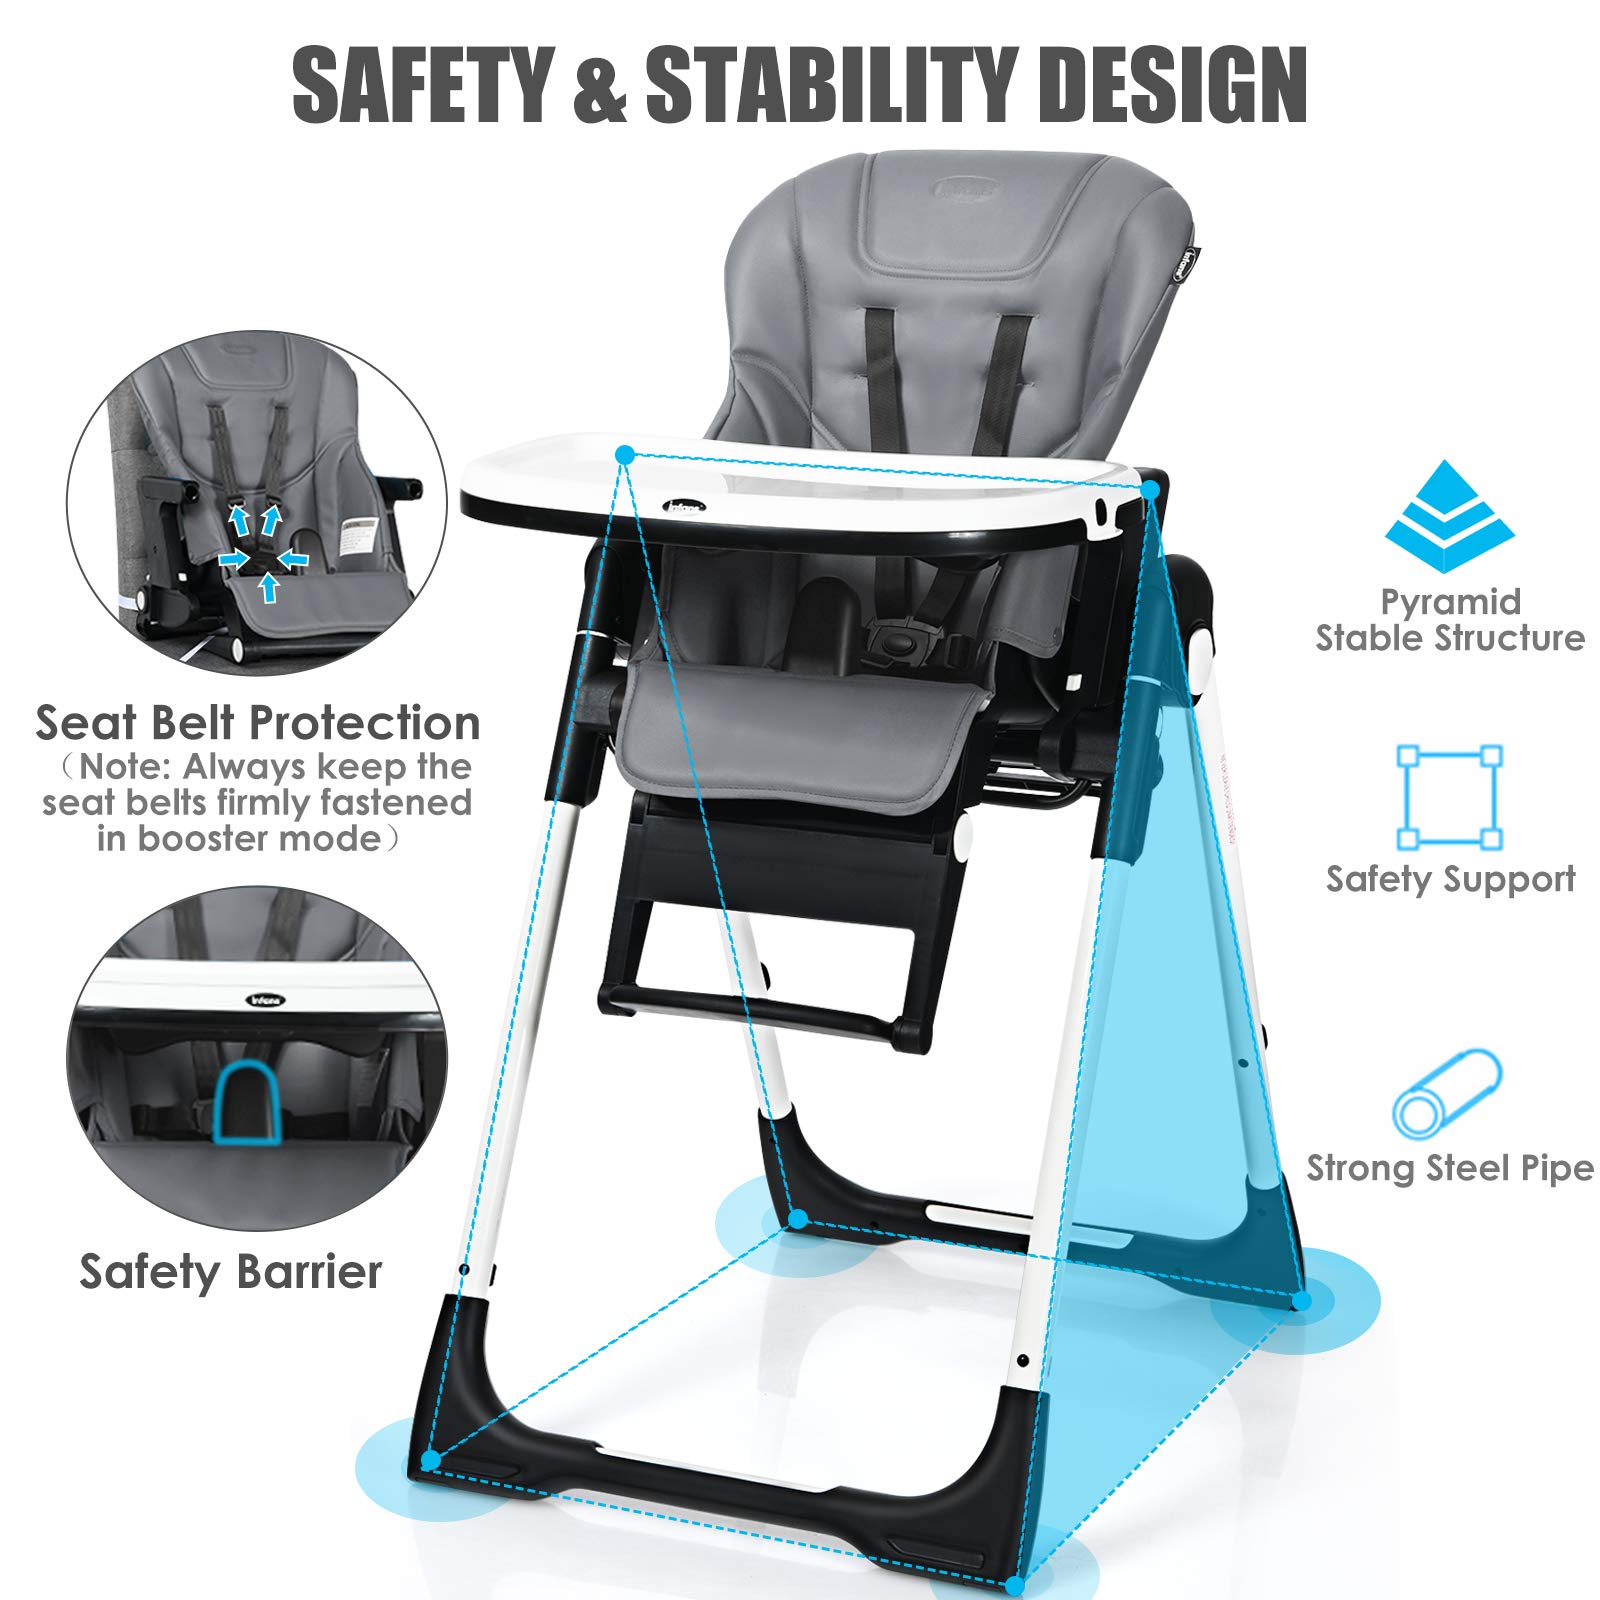 INFANS 4 in 1 High Chair–Booster Seat, Convertible Highchair w/Adjusta